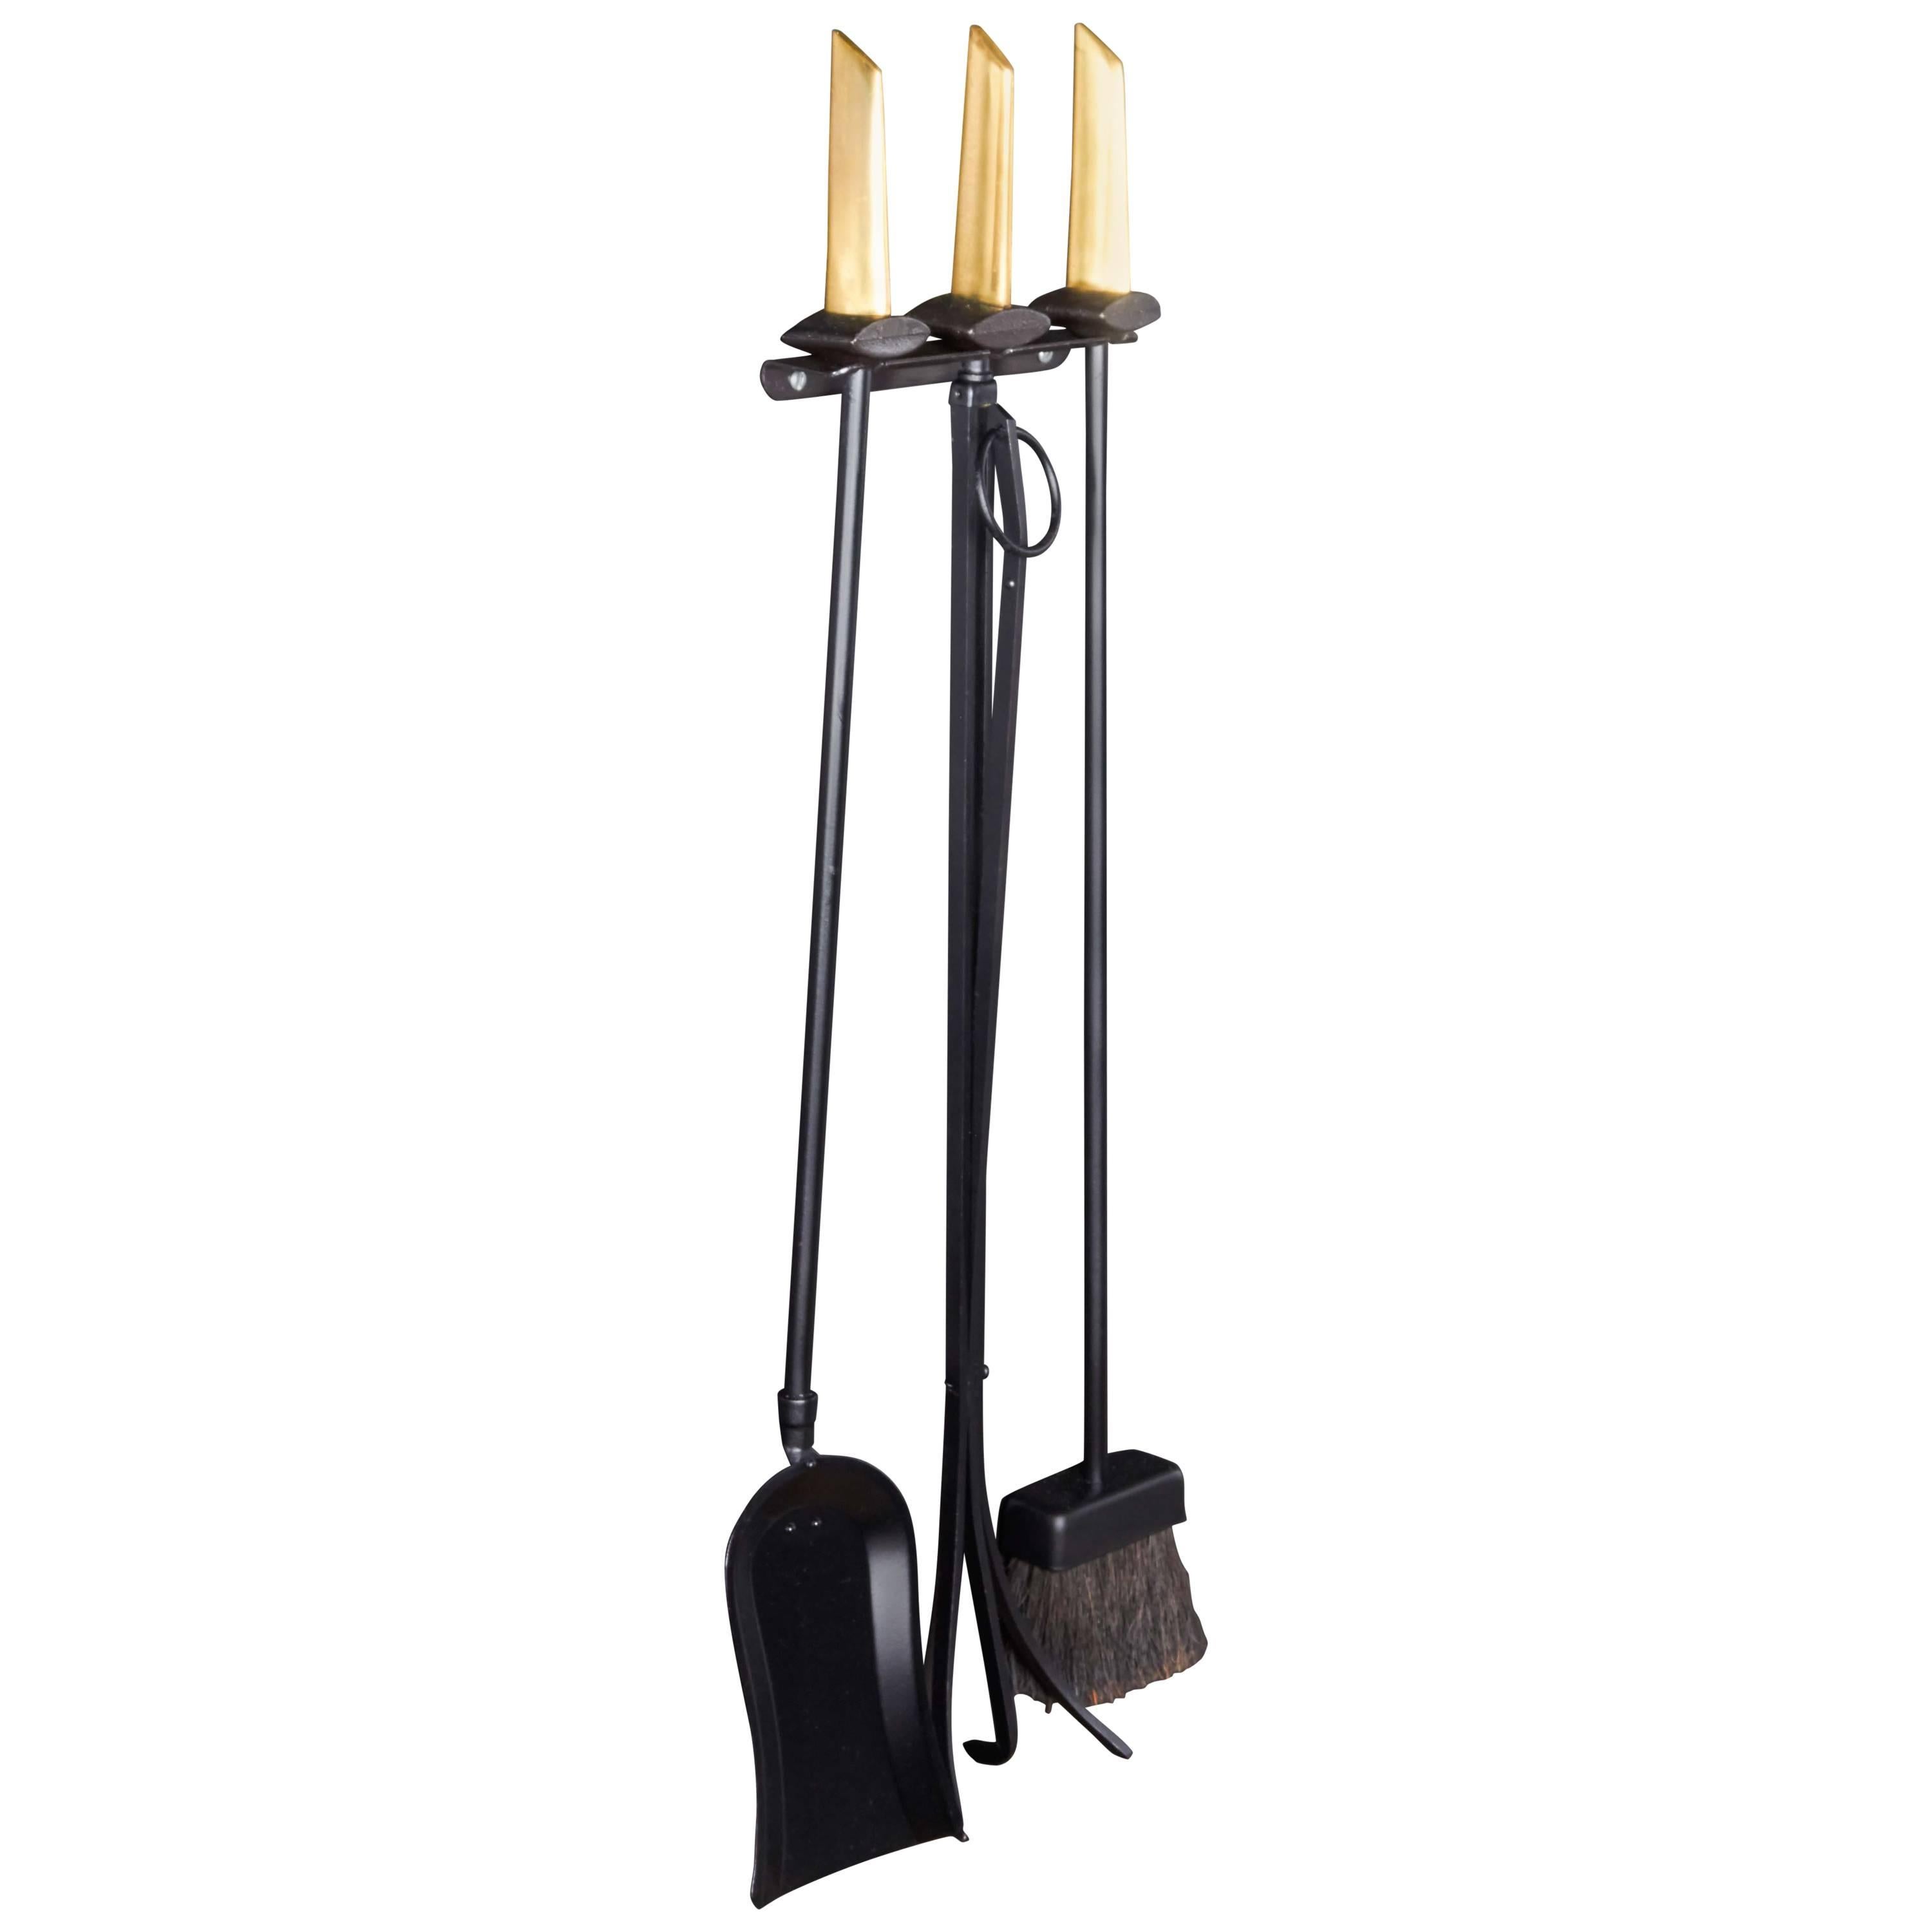 Mid-century modern fireplace tool set by iconic 20th century designer Donald Deskey, for the Bennett Company. The set features a wall-mounted backplate which houses the shovel, brush and poker. The tools are all made of wrought iron with a black